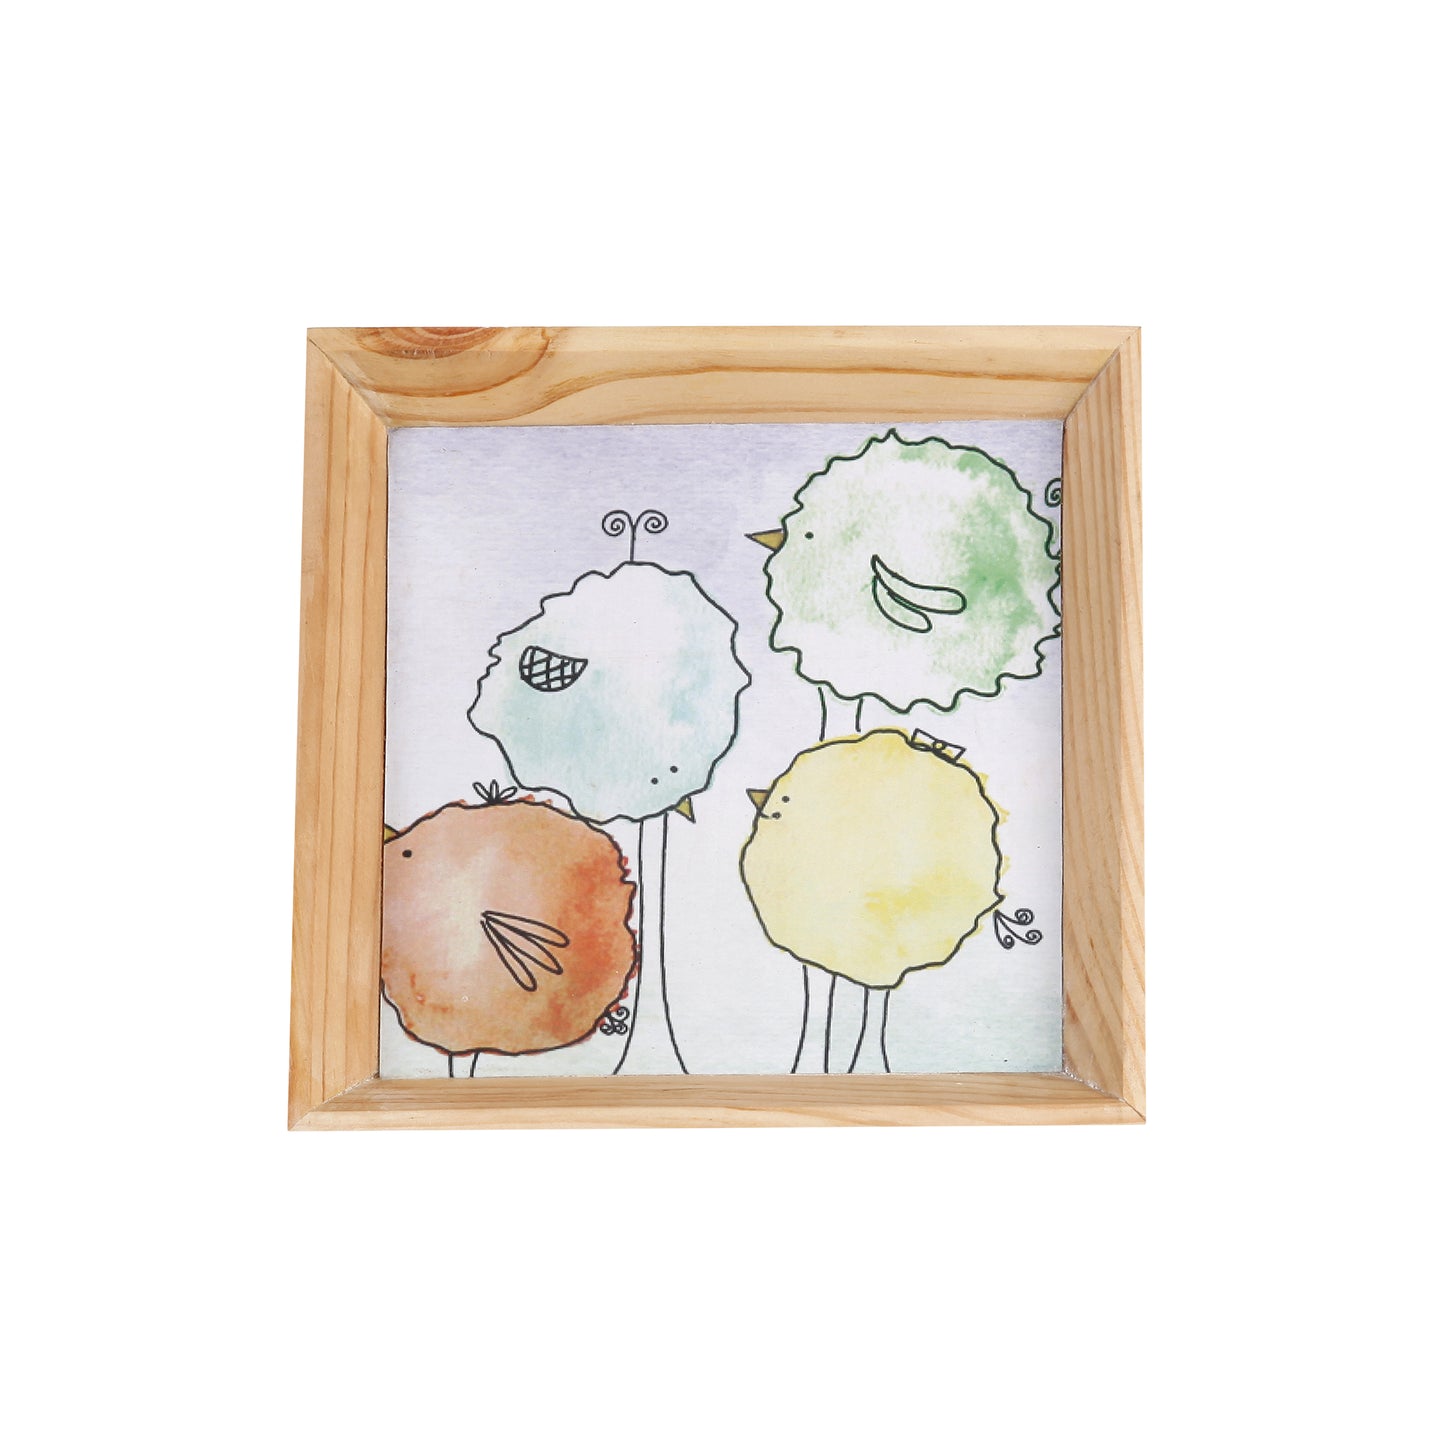 A Tiny Mistake Floral Caricature Birds Small Square Wooden Serving Tray, 18 x 18 x 2 cm